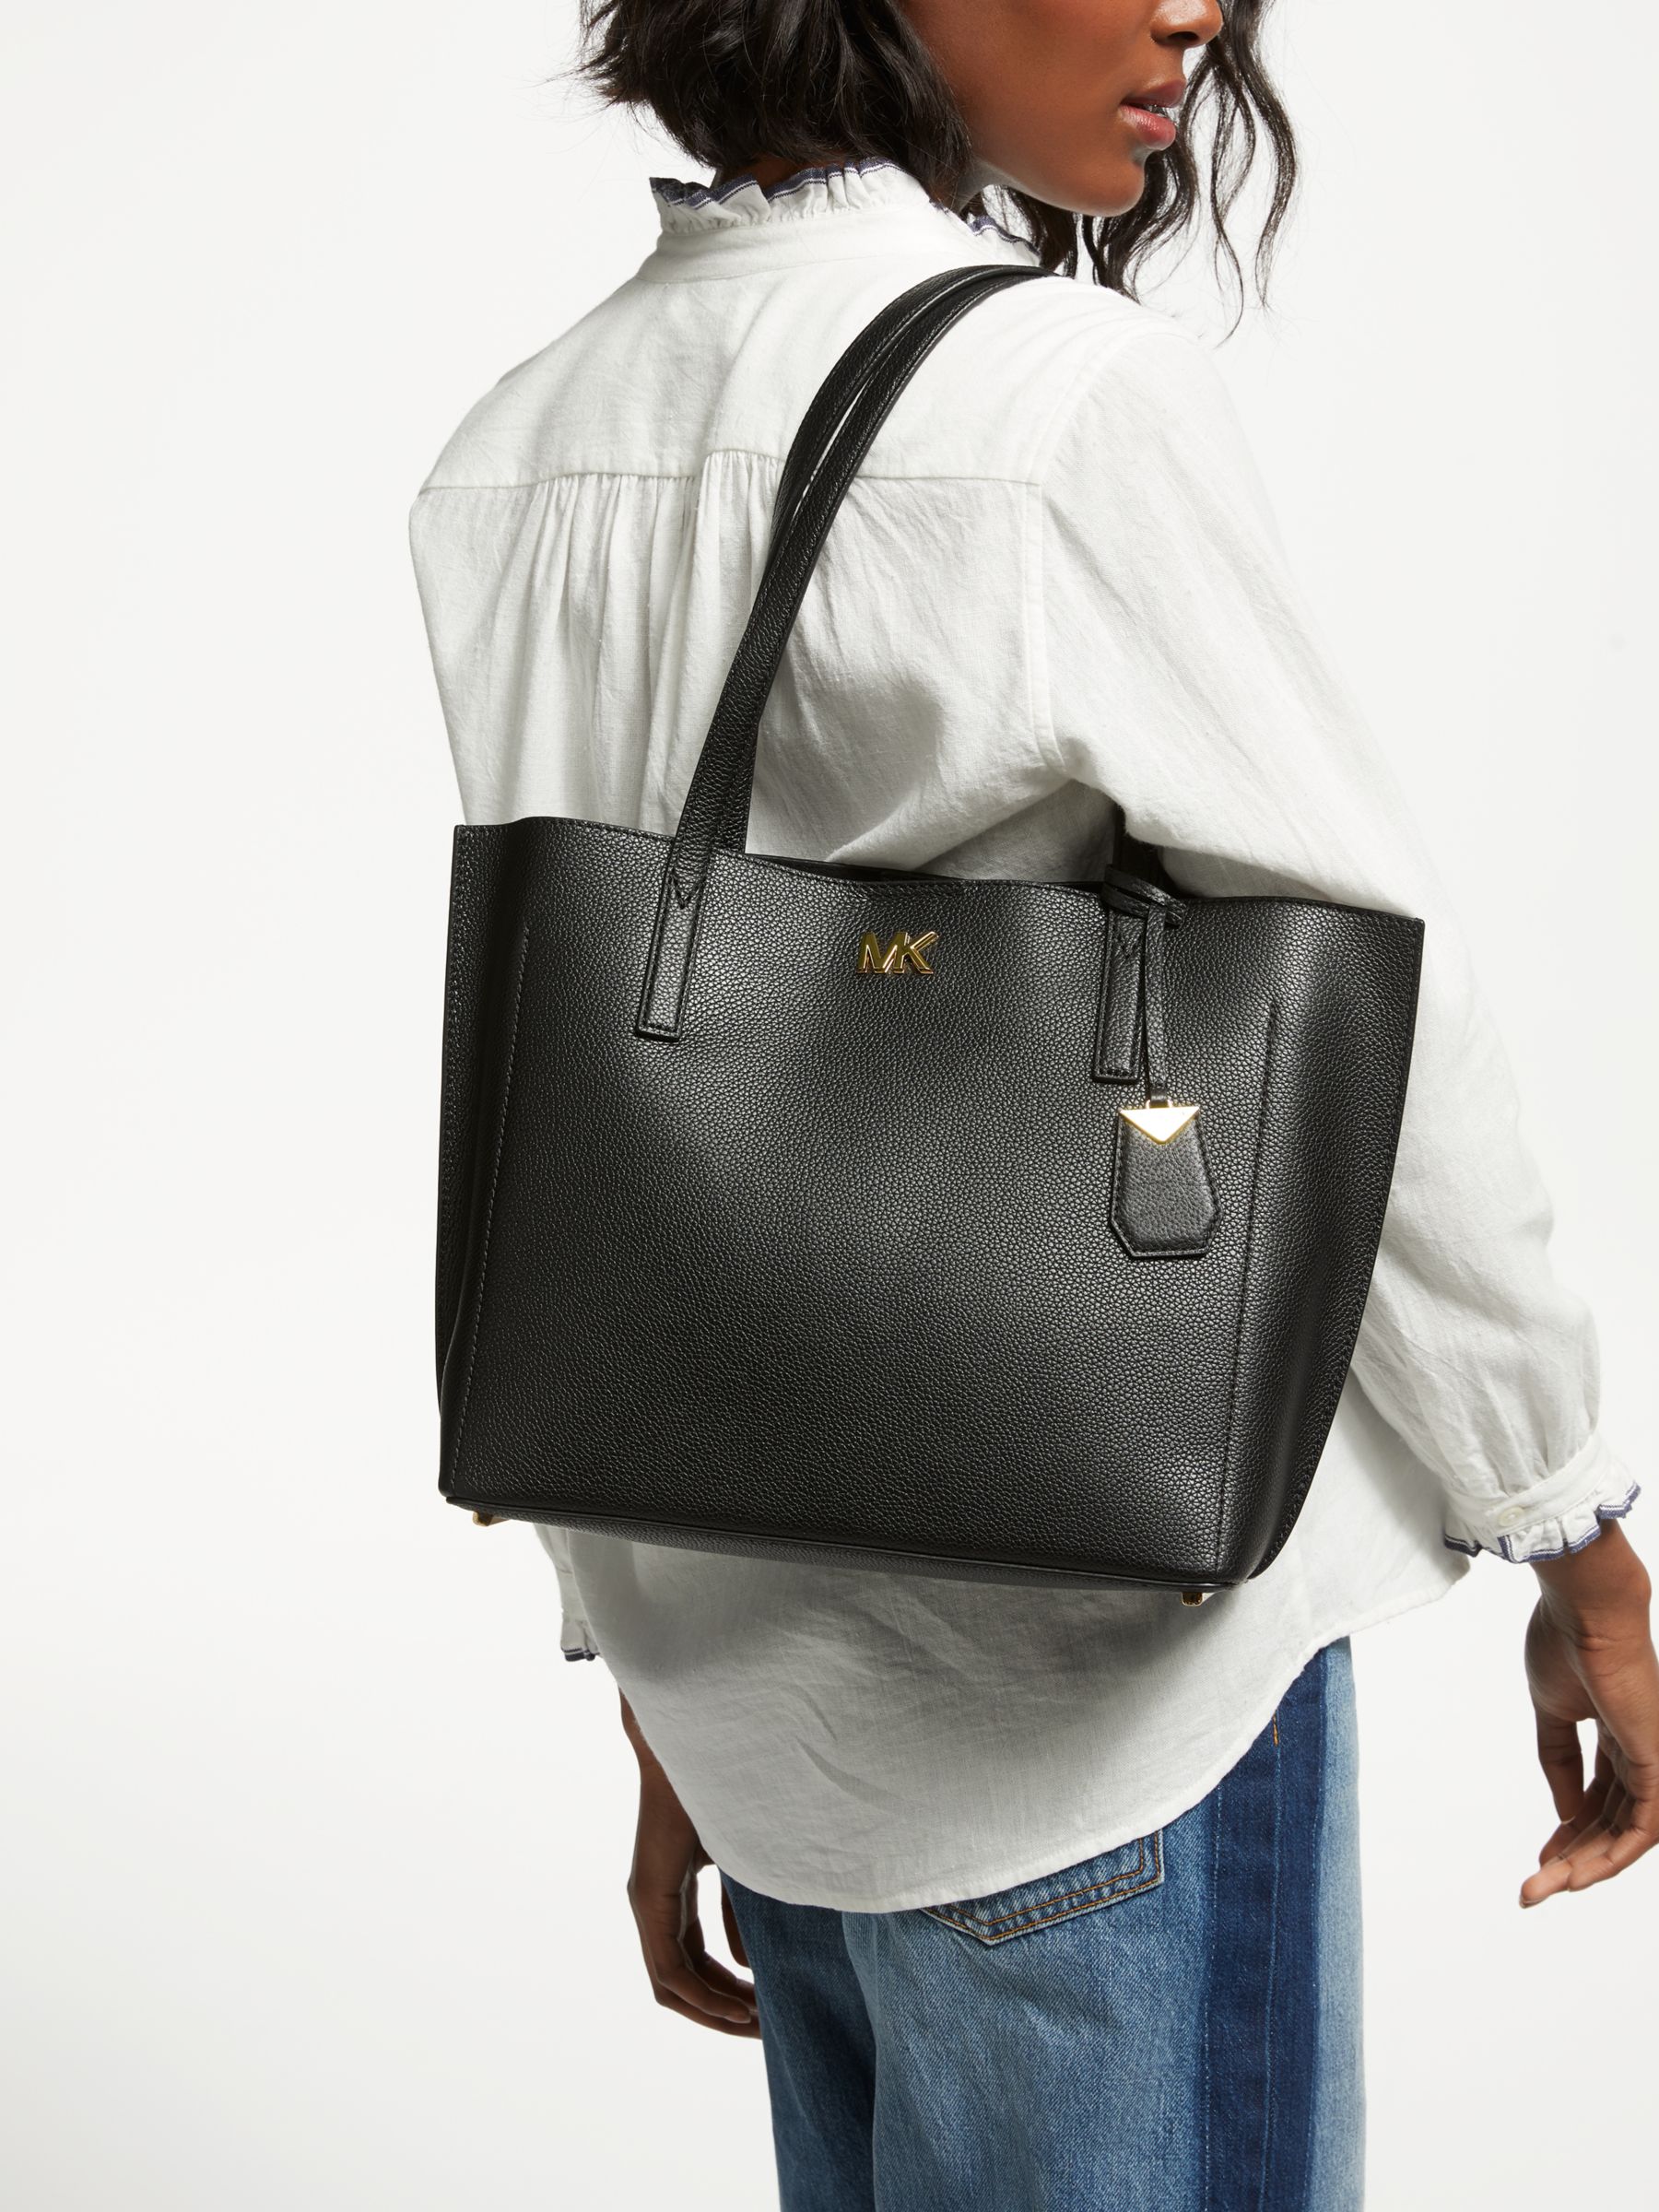 ana bonded leather tote